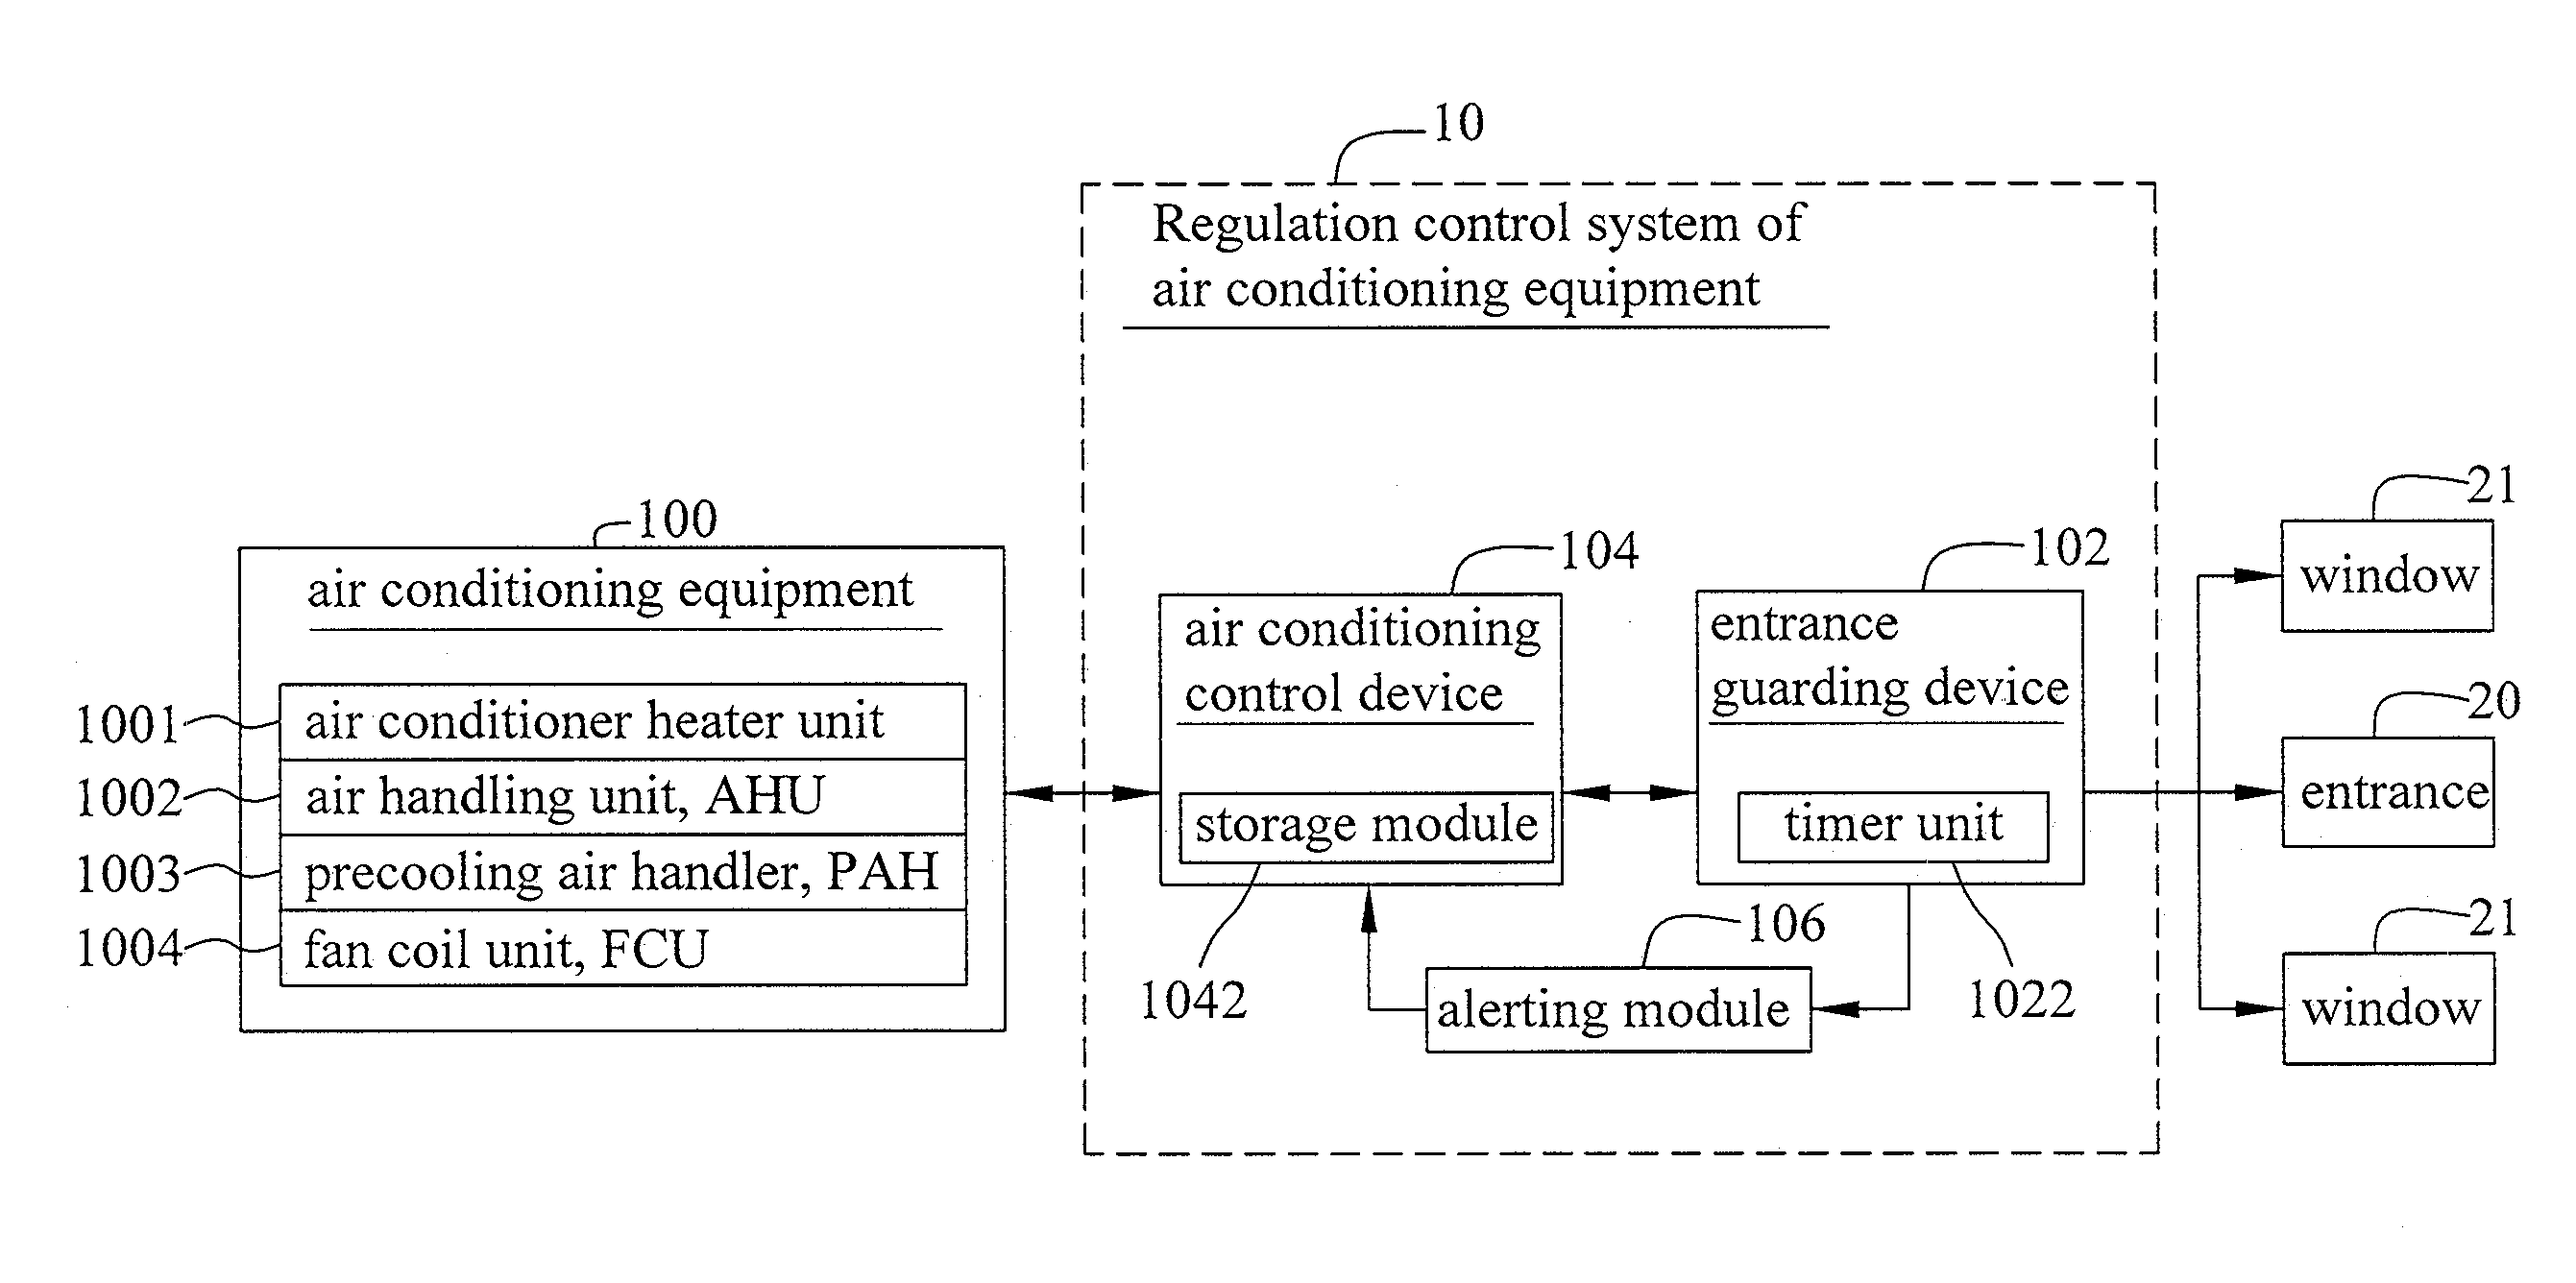 Regulation control system of air conditioning equipment